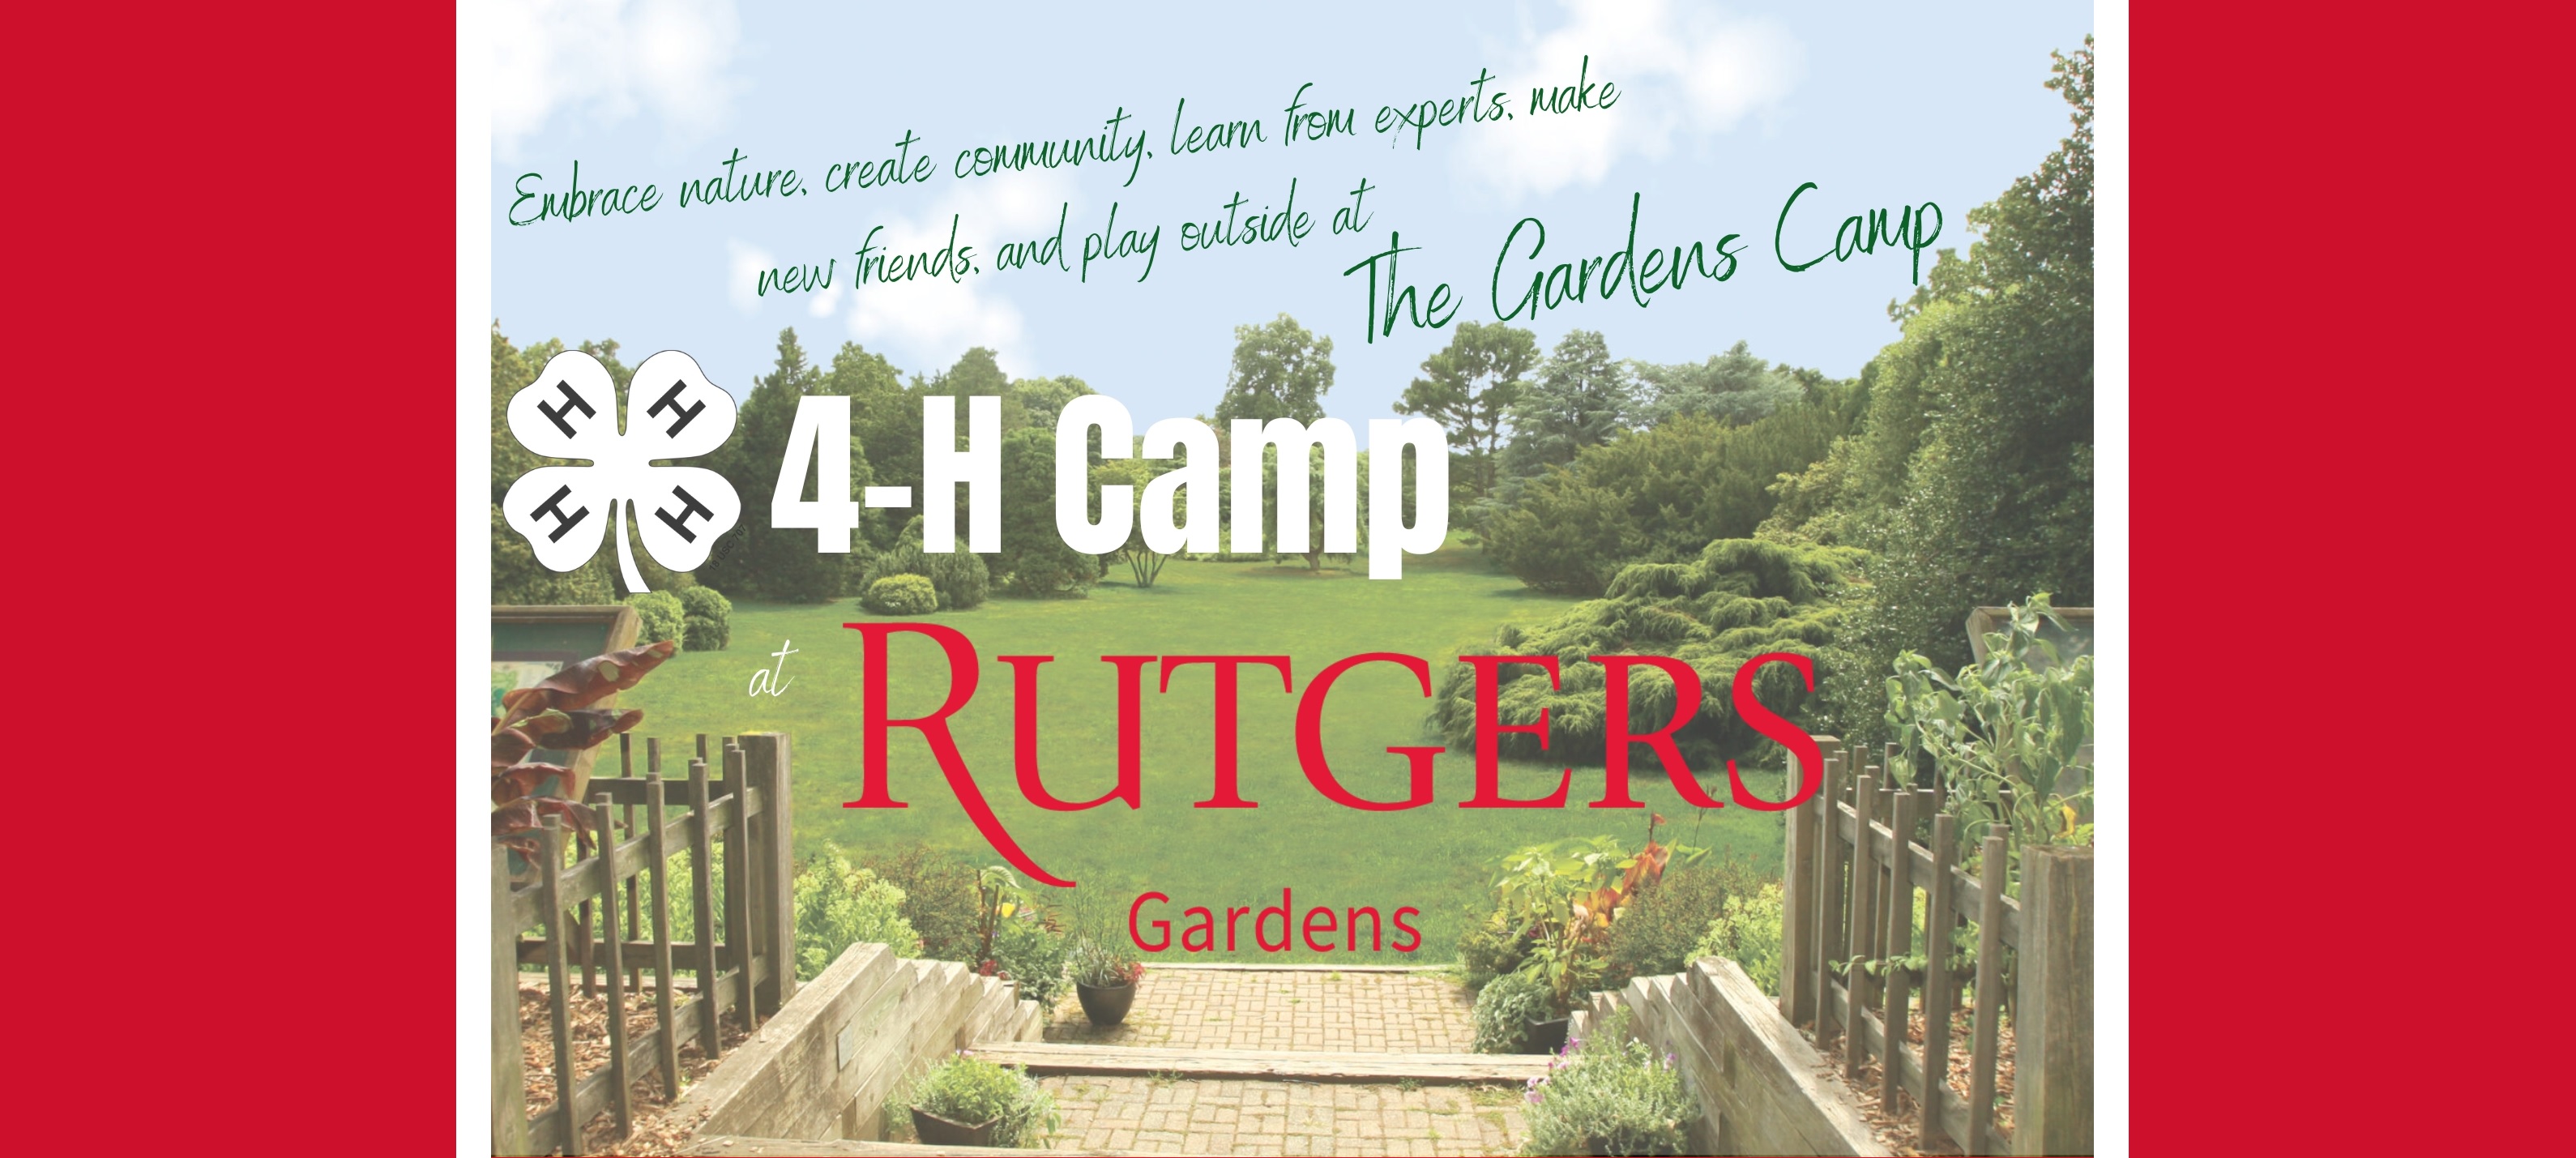 4-H Camp at the Gardens